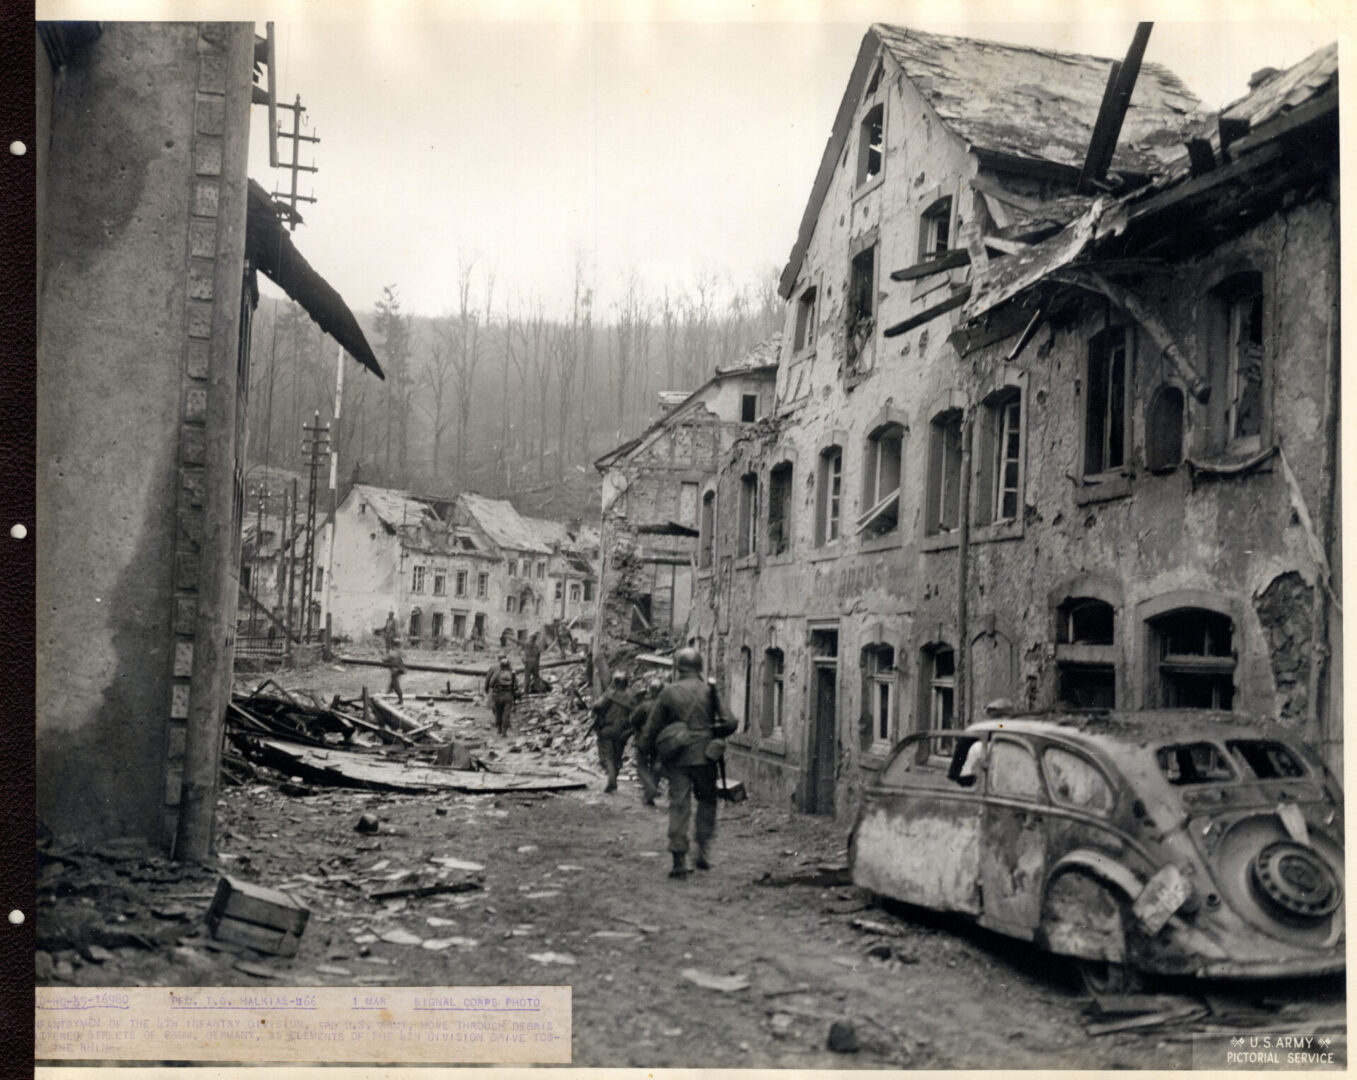 Infantrymen patrol the littered streets of Prum in Germany